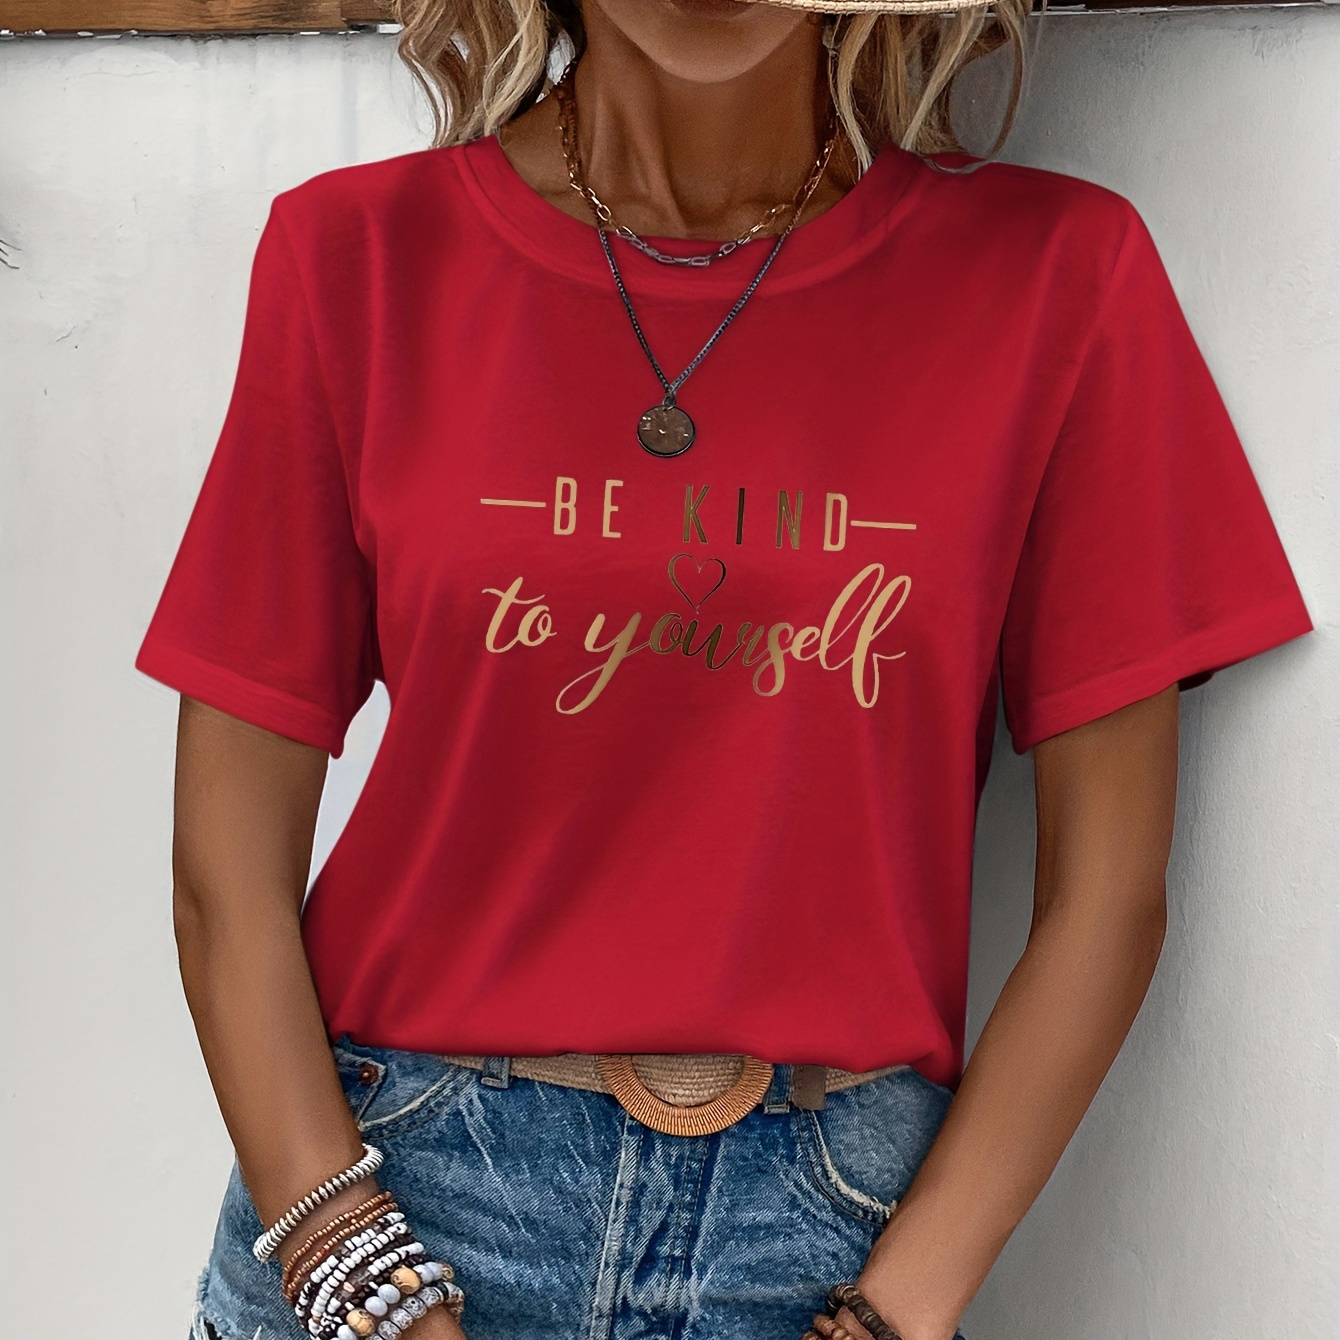 

Letter Print T-shirt, Casual Short Sleeve Crew Neck Top For Spring & Summer, Women's Clothing